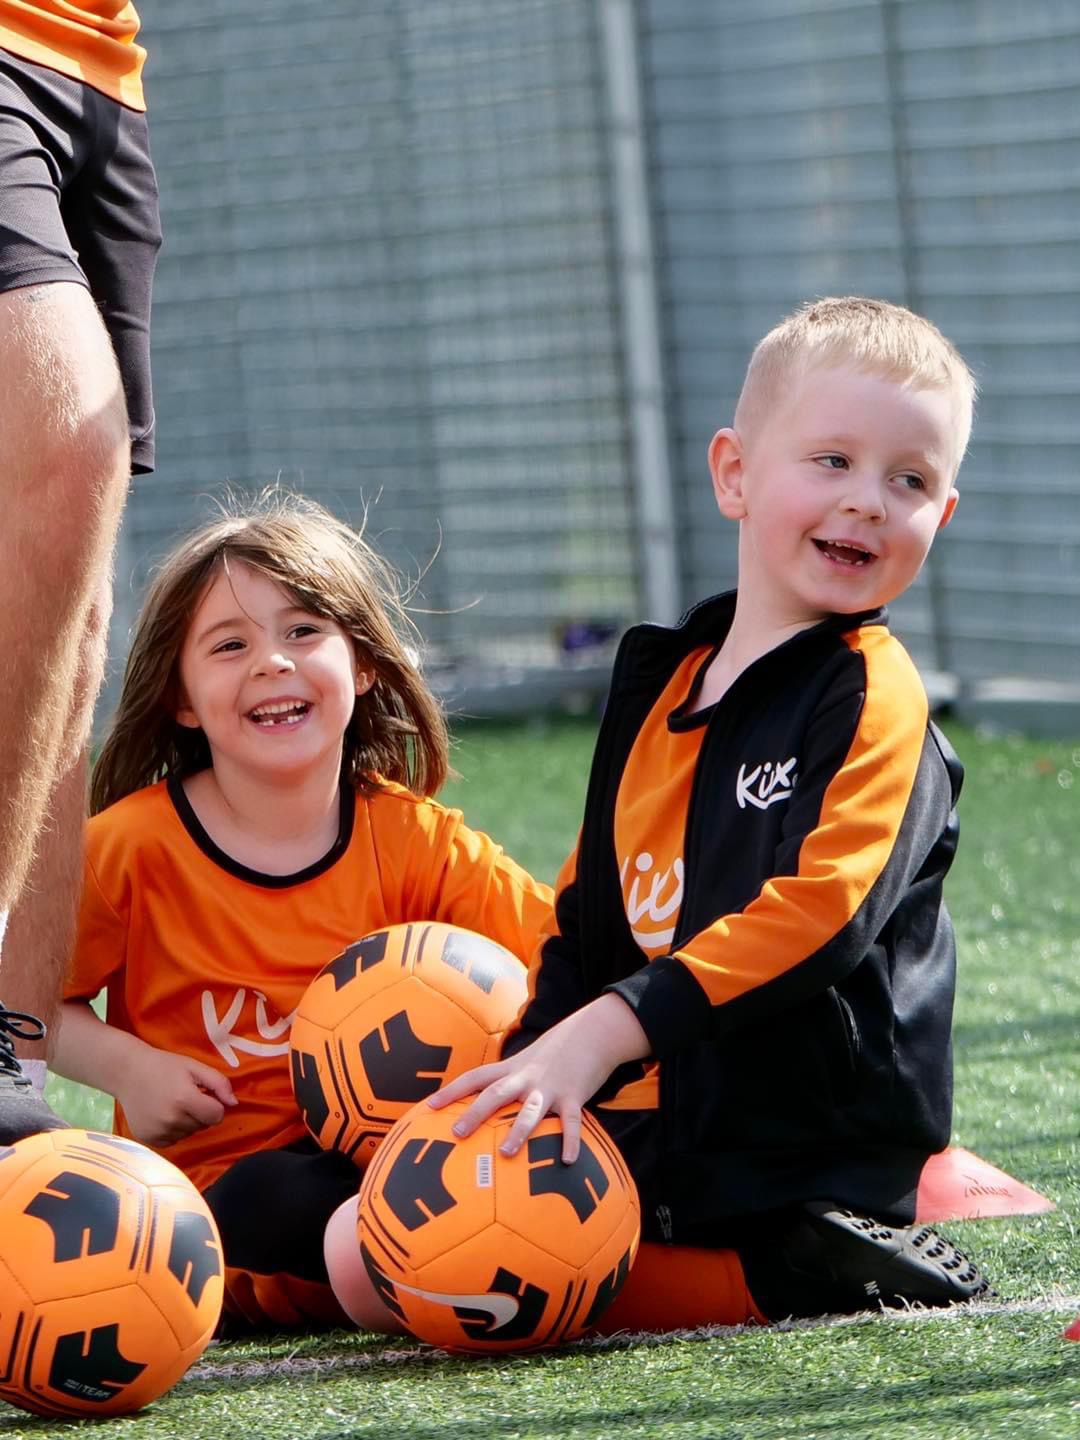 Image of a Kixx Football lesson for under 5s